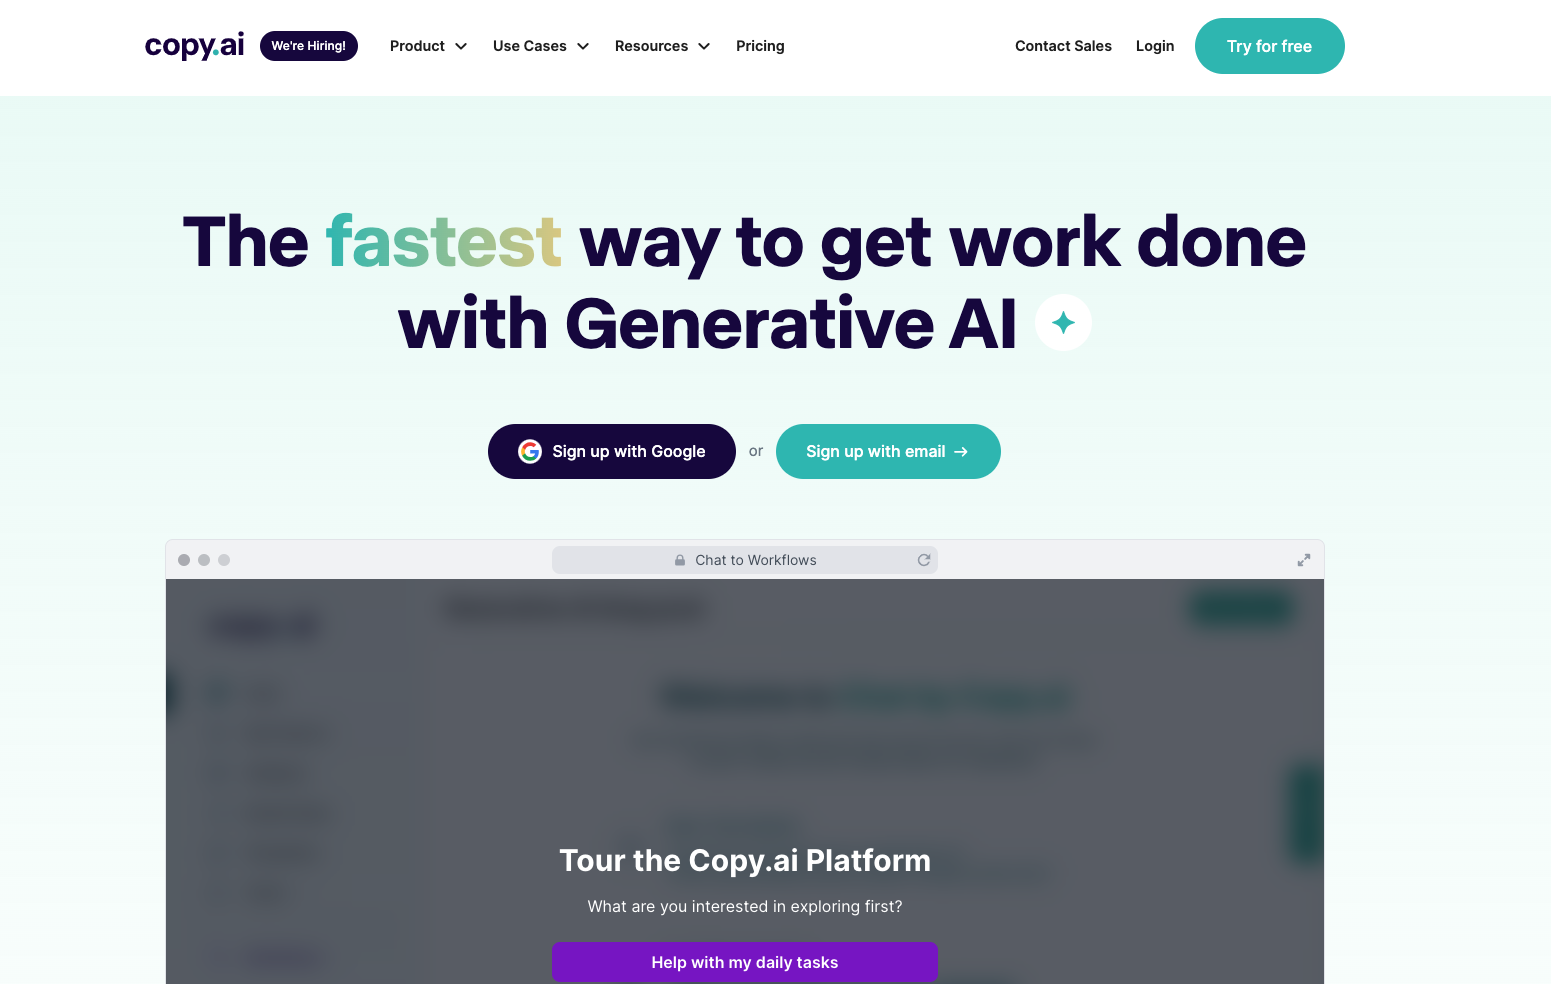 Copy.ai landing page with a video demo showing how the platform works